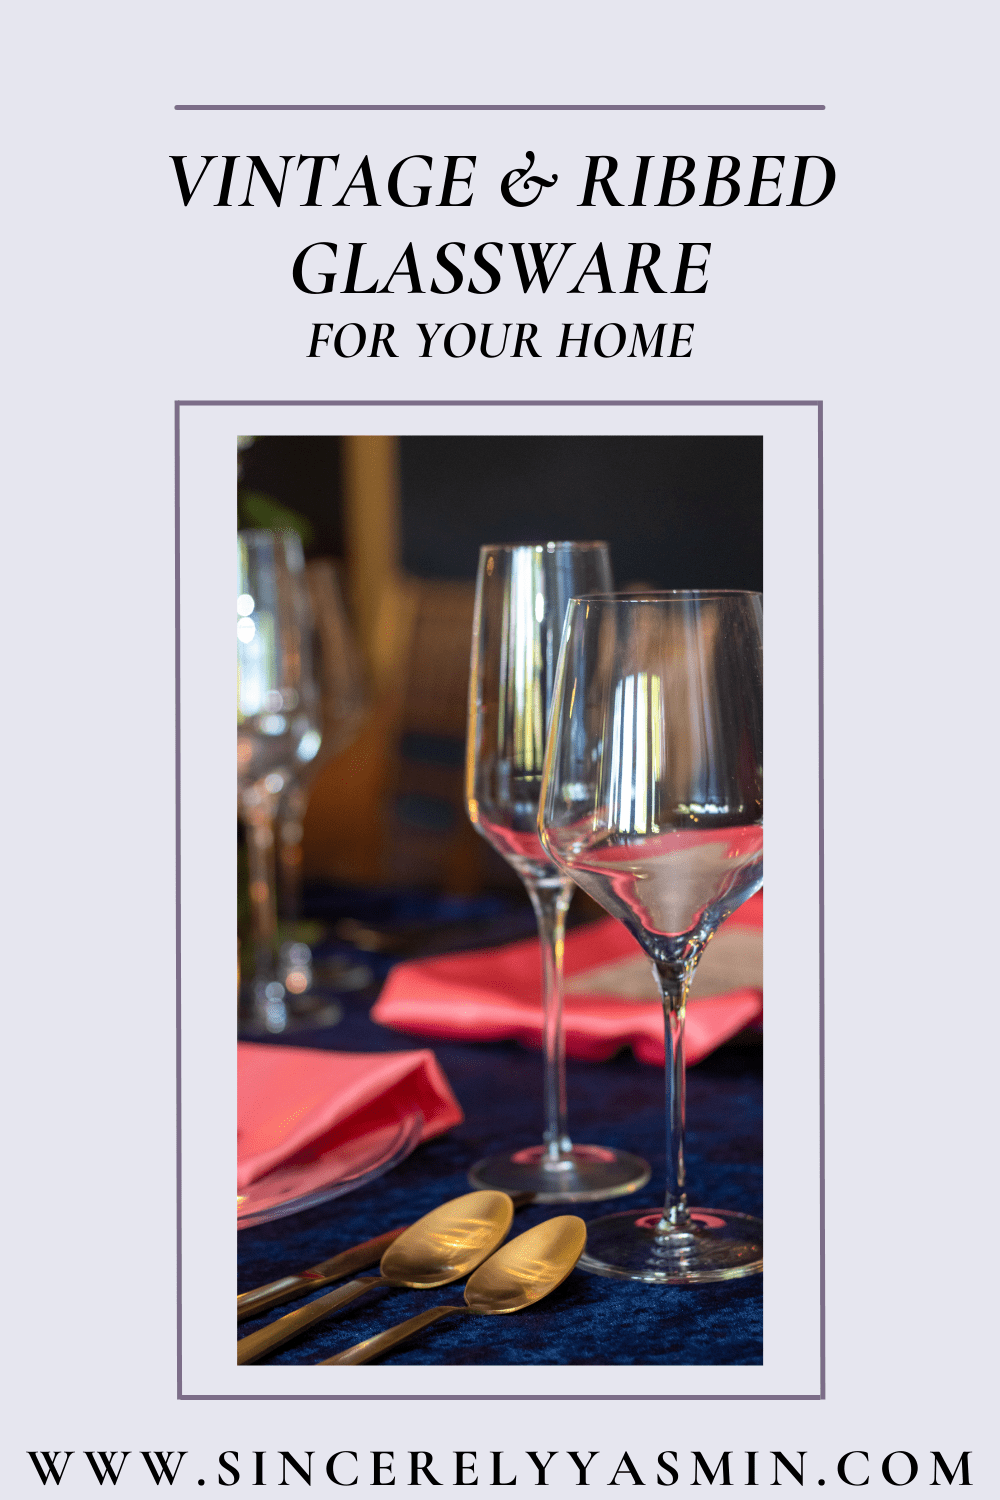 Breathtaking Vintage Glassware & Ribbed Glassware for Your Home